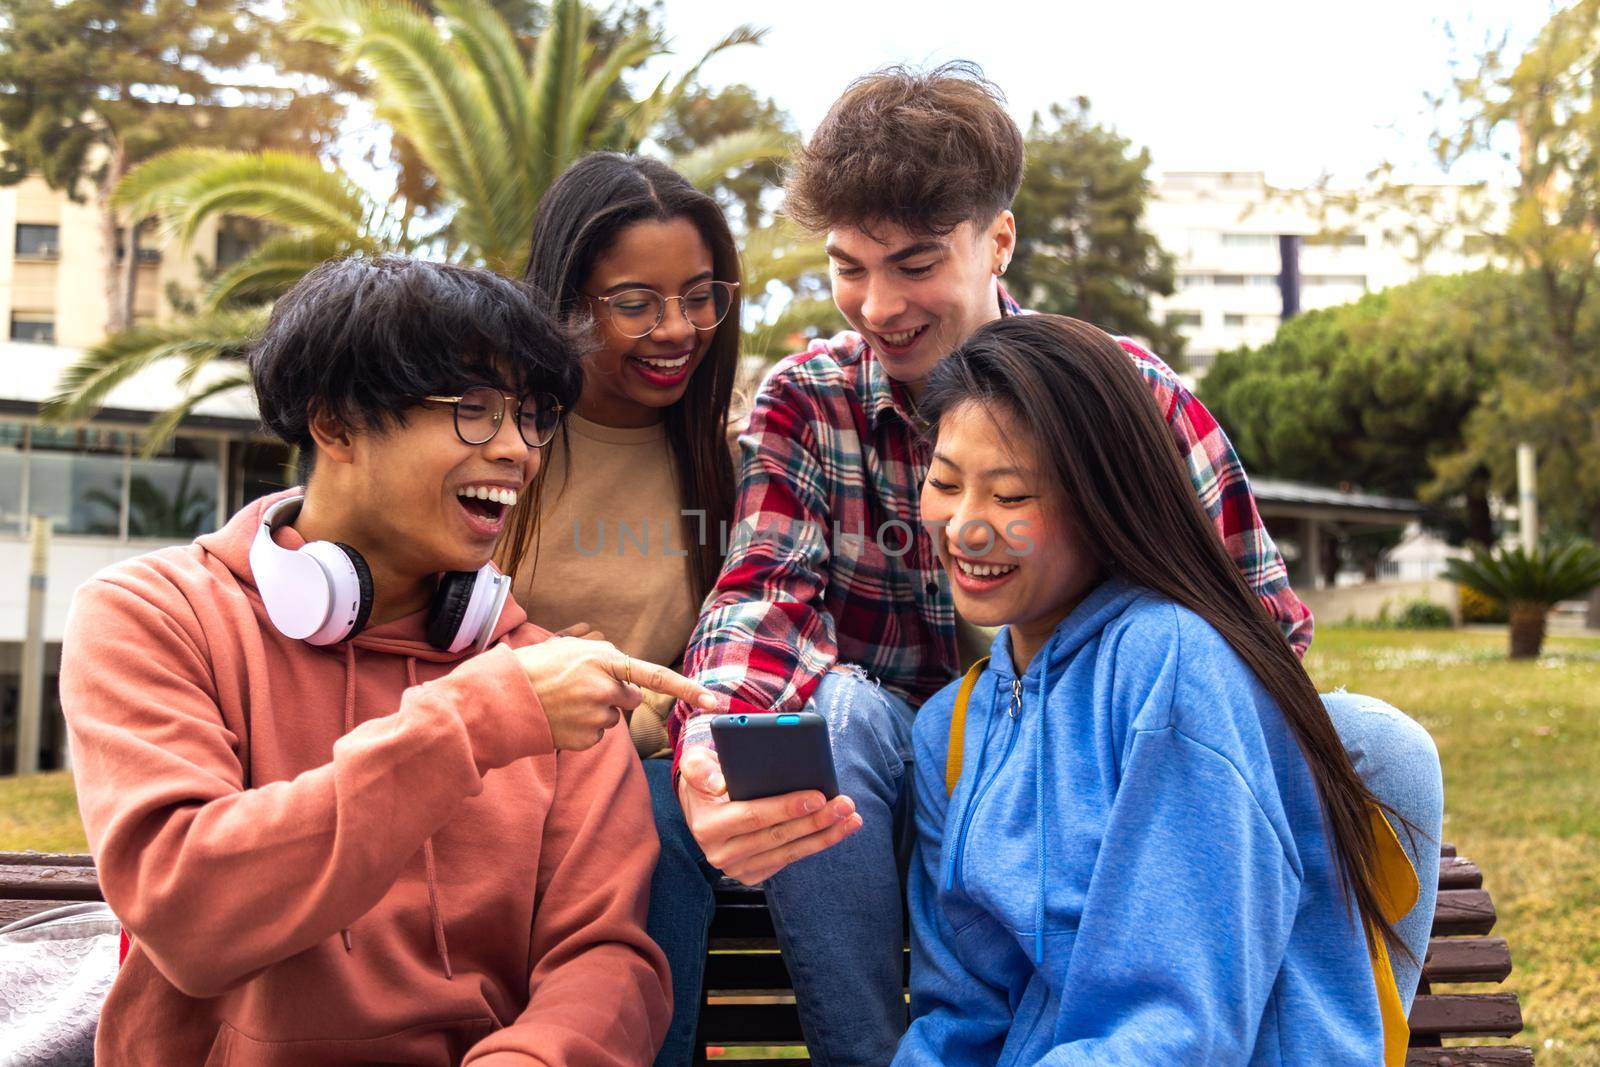 Happy young college student friends look at mobile phone. Multiracial teenagers using smartphone laughing together outdoor. Youth lifestyle and social media addiction concept.